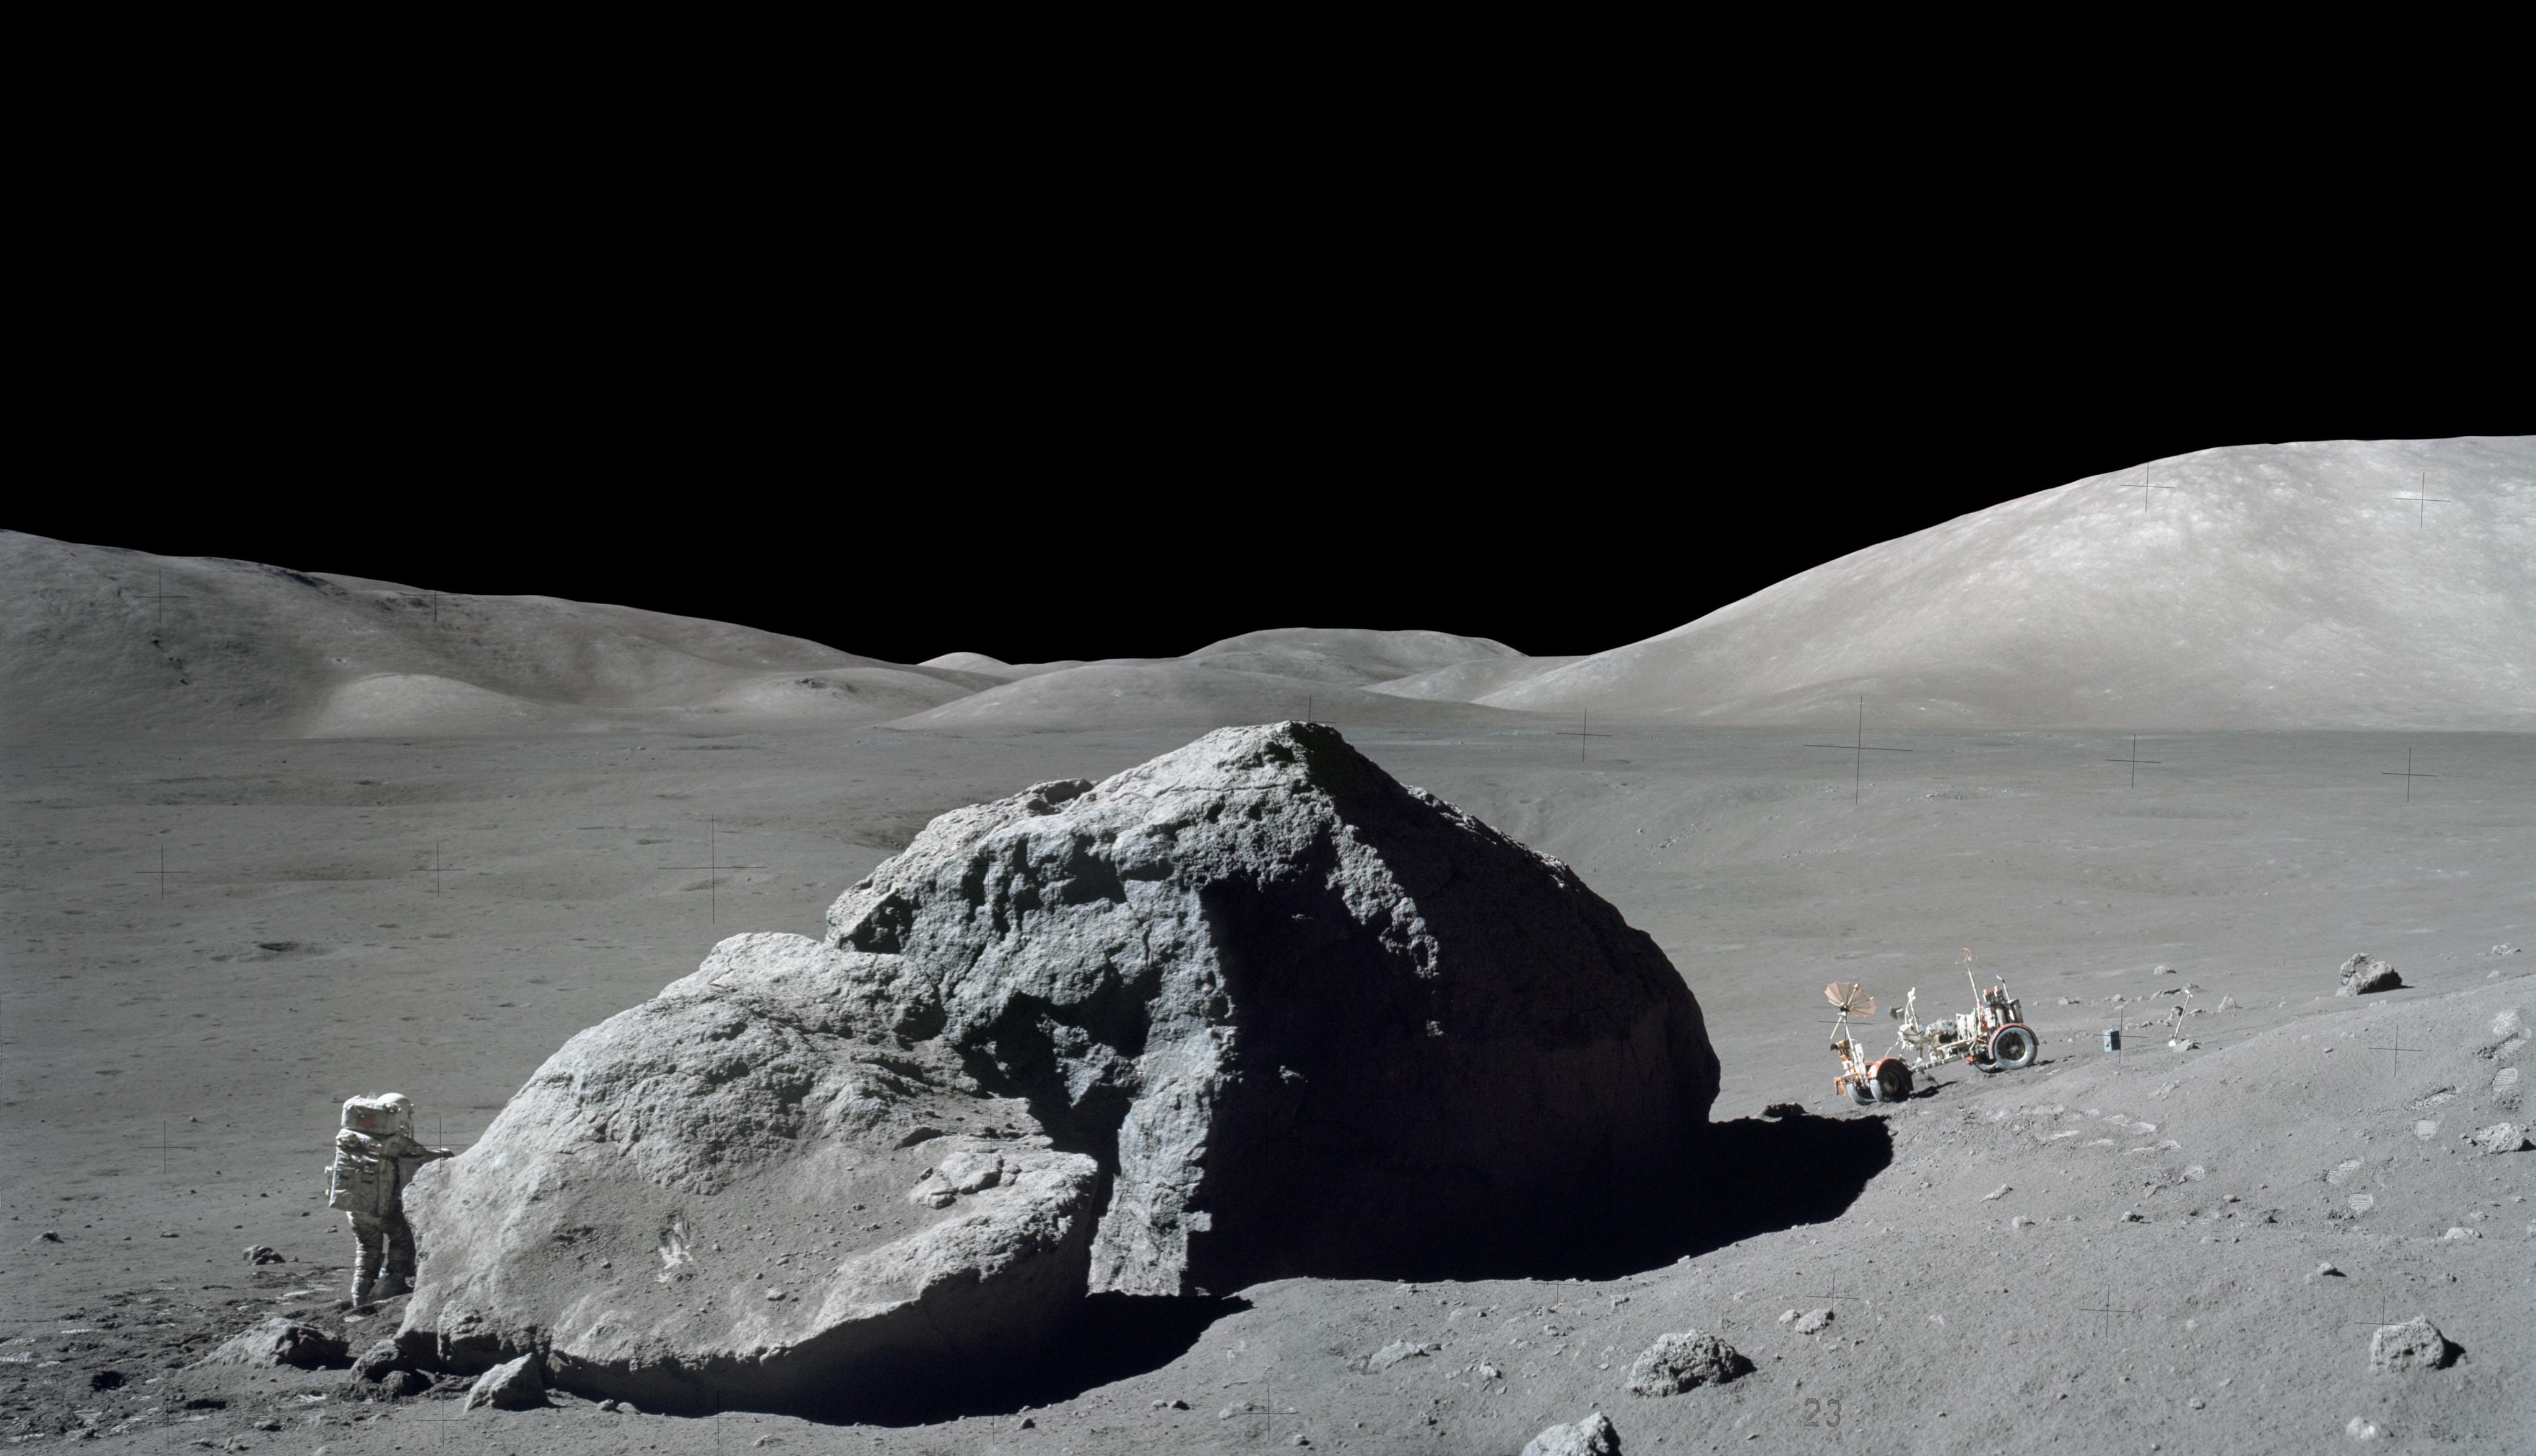 Astronaut and rover on the Moon's surface, separated by a boulder several times taller than the man. 